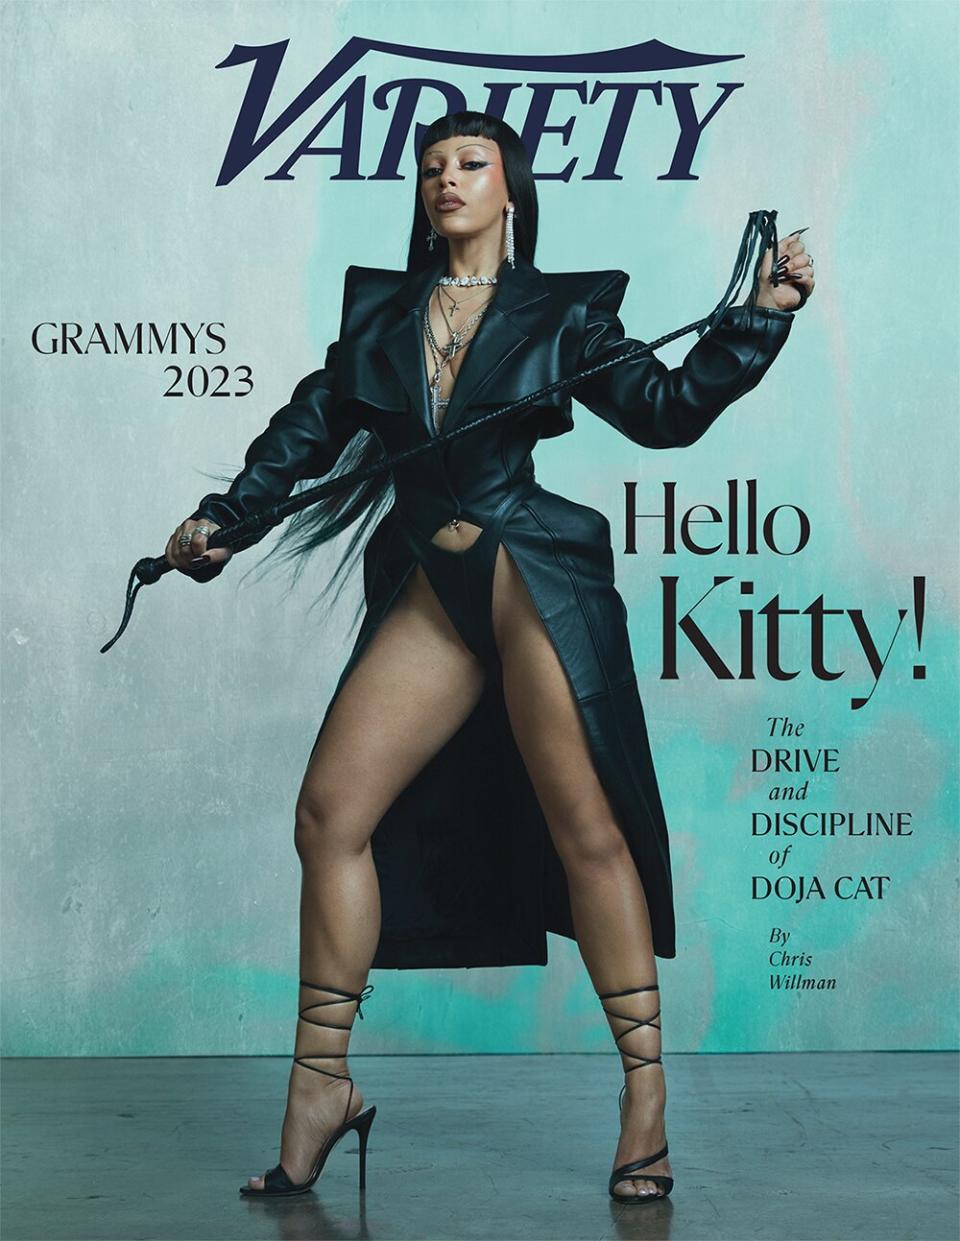 Doja Cat on the cover of Variety